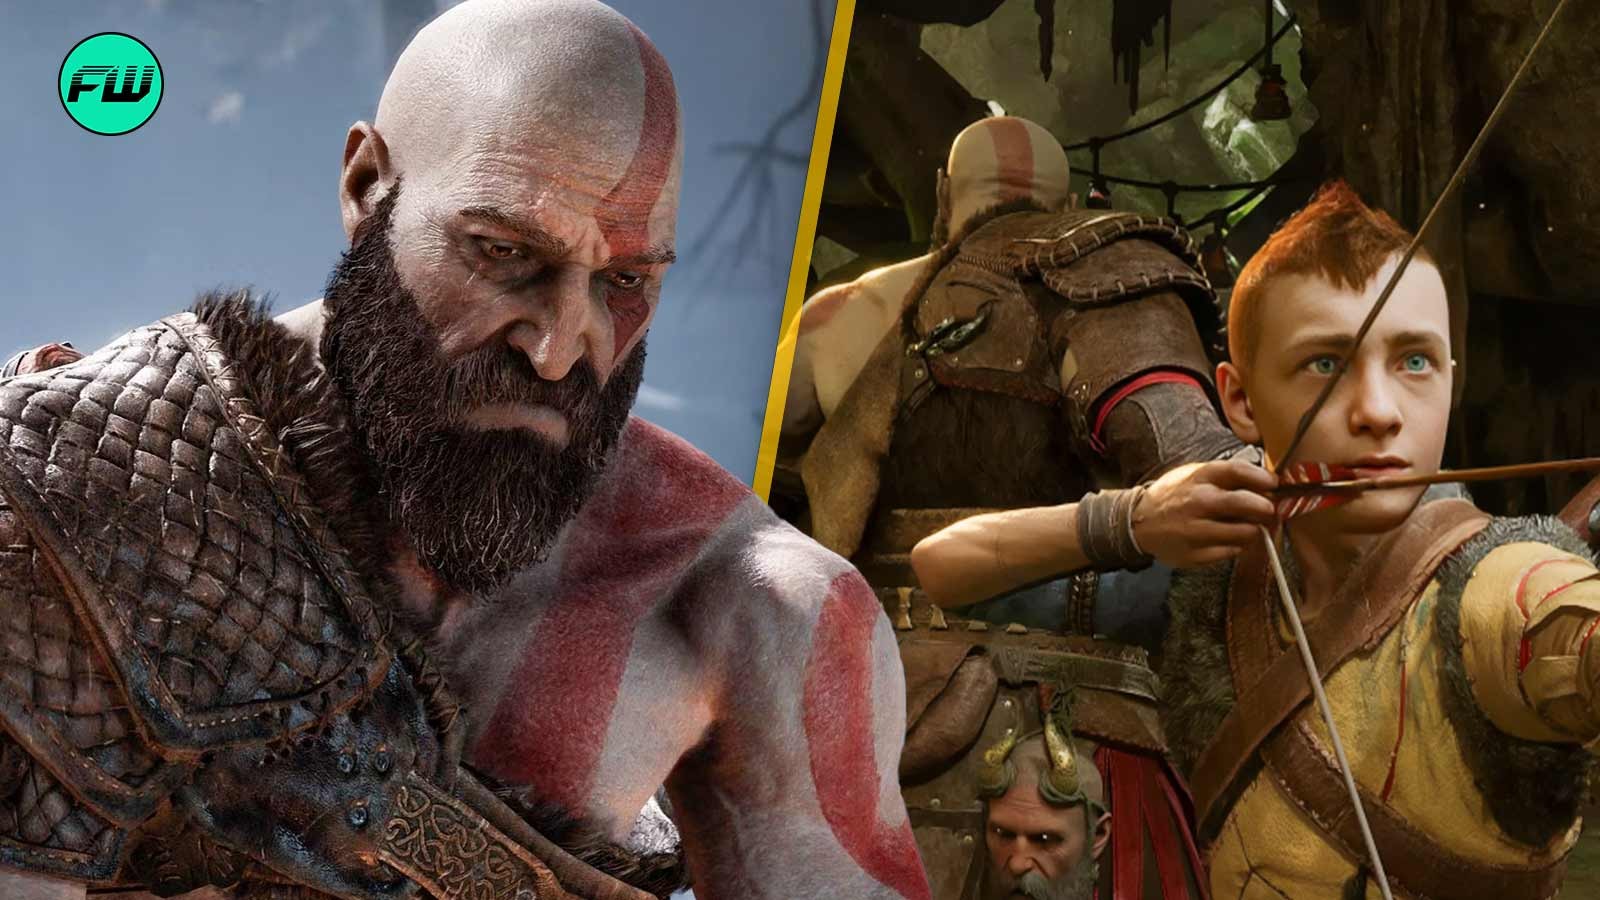 A God of War fan’s terrible suggestion would ruin any hype surrounding the next game, and we hope Santa Monica ignores it